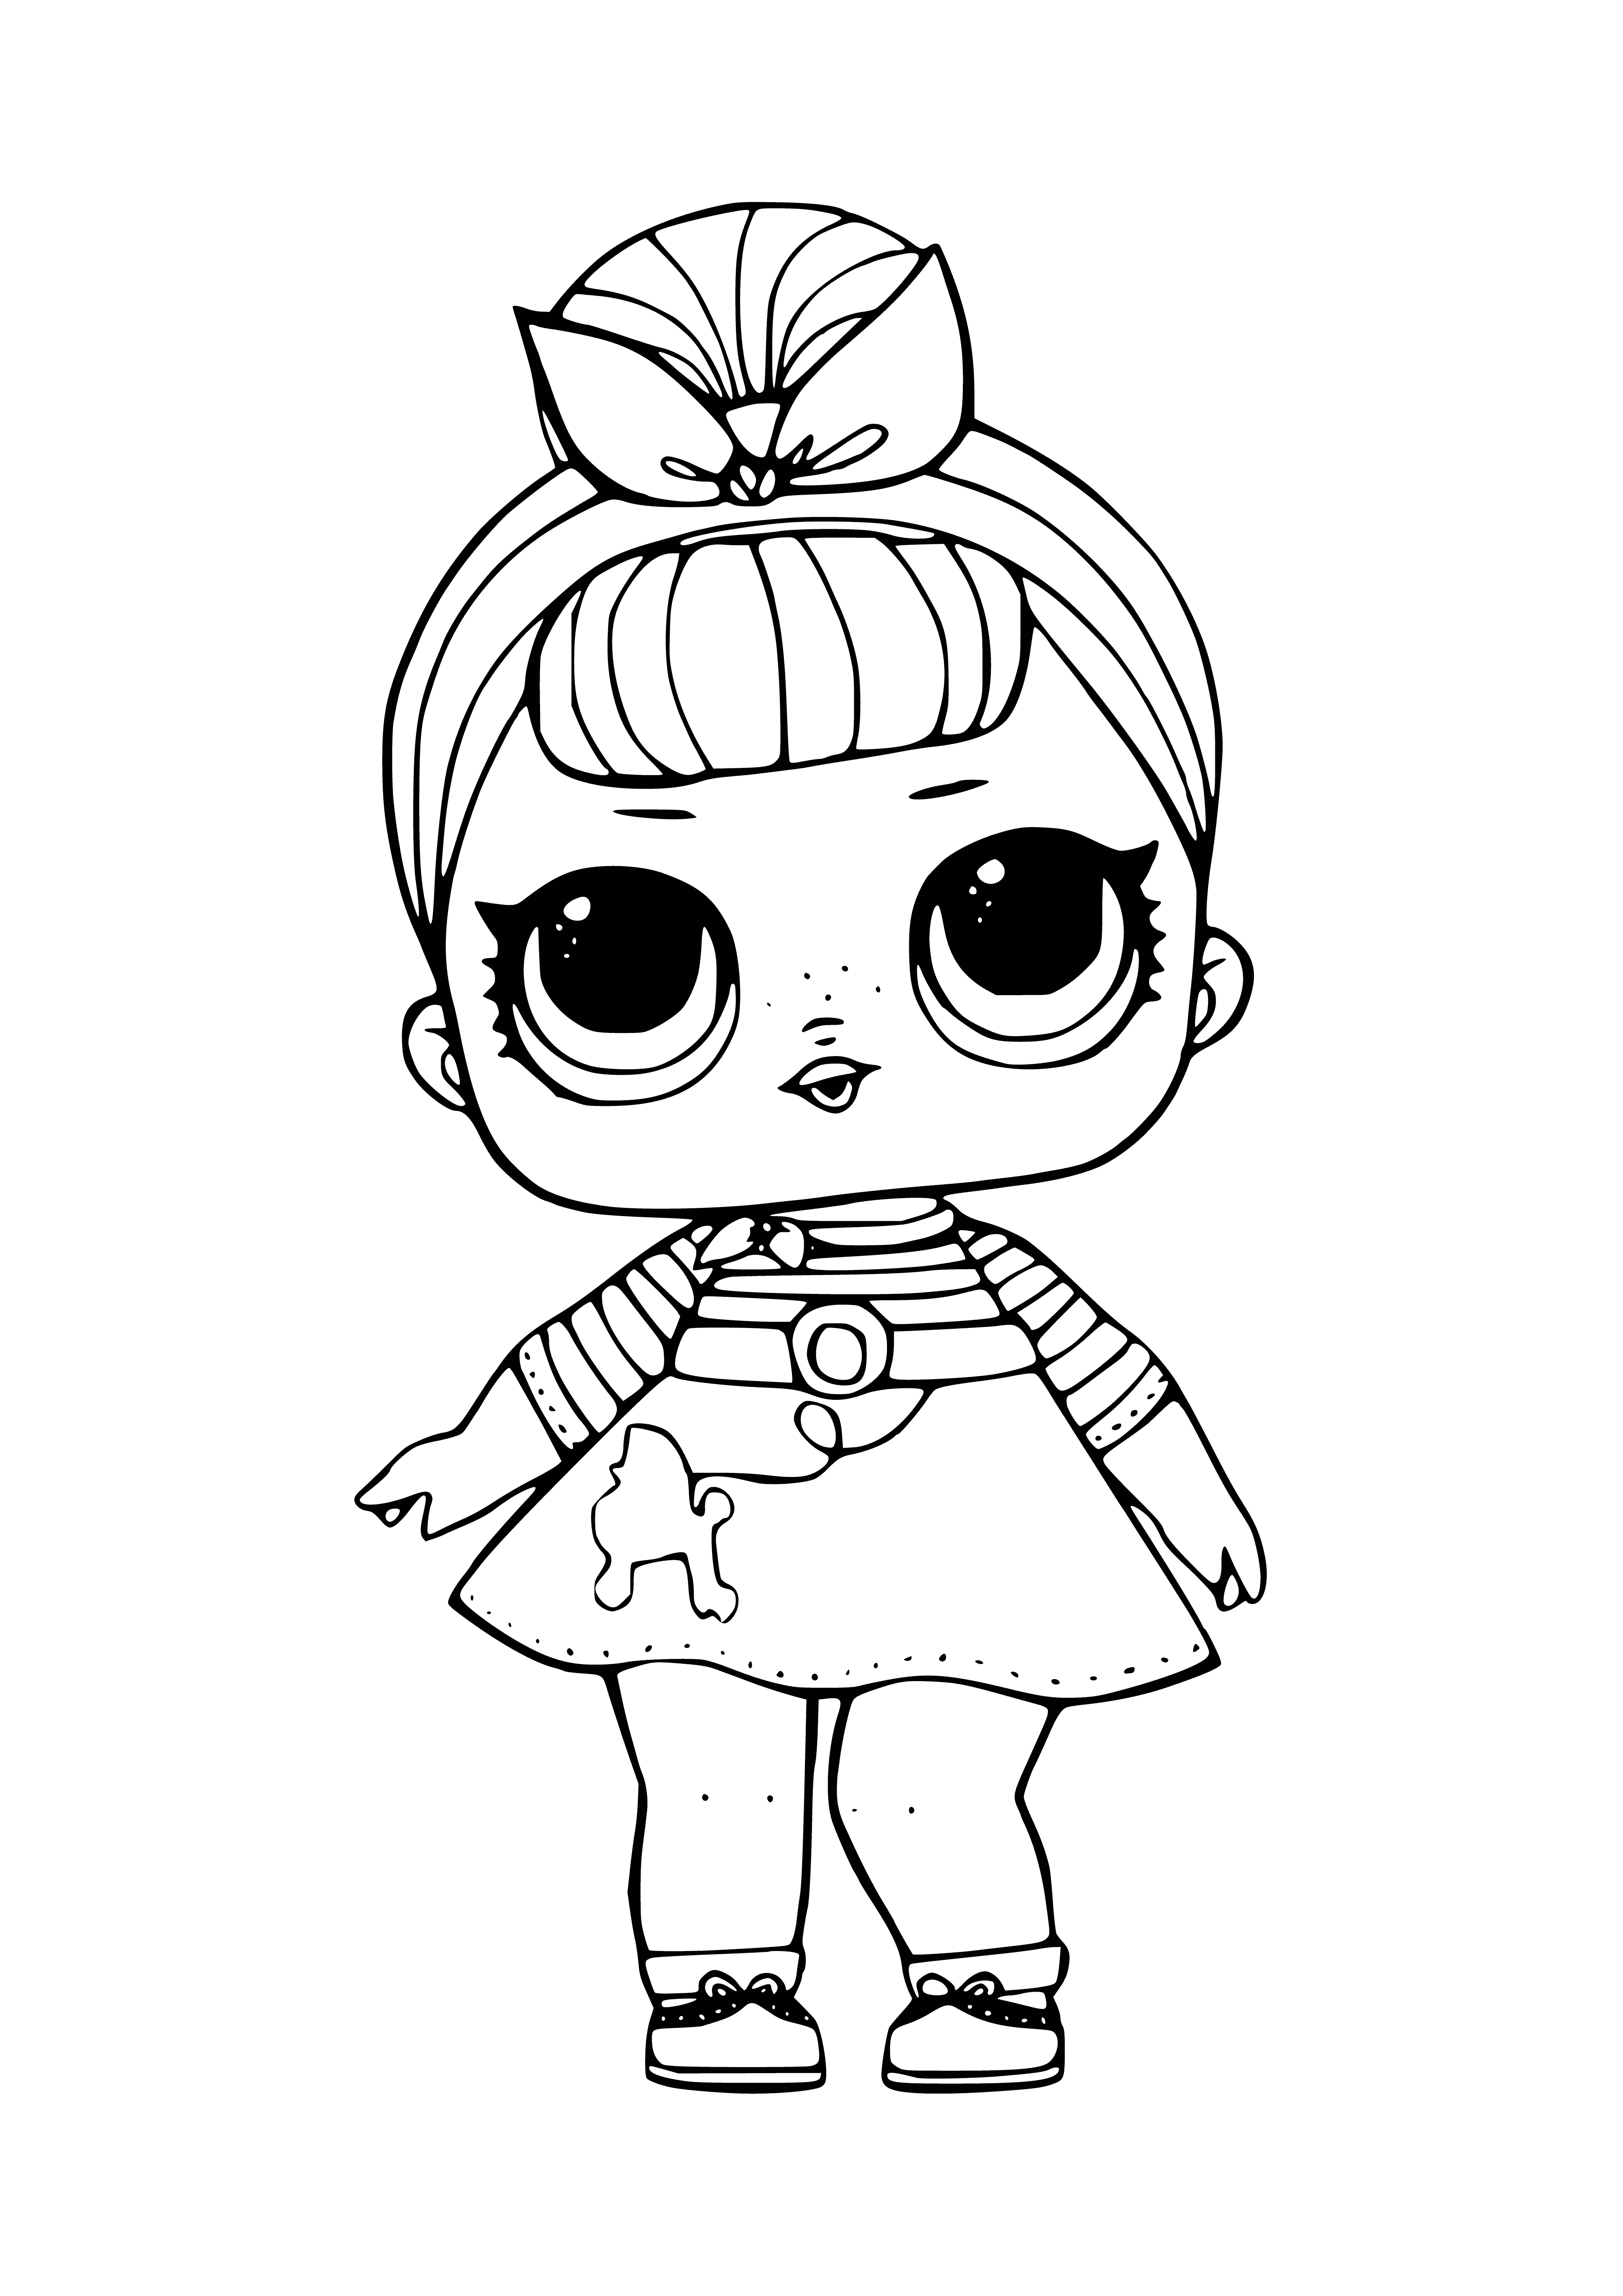 LOL Sis Swing Episode 1 coloring page